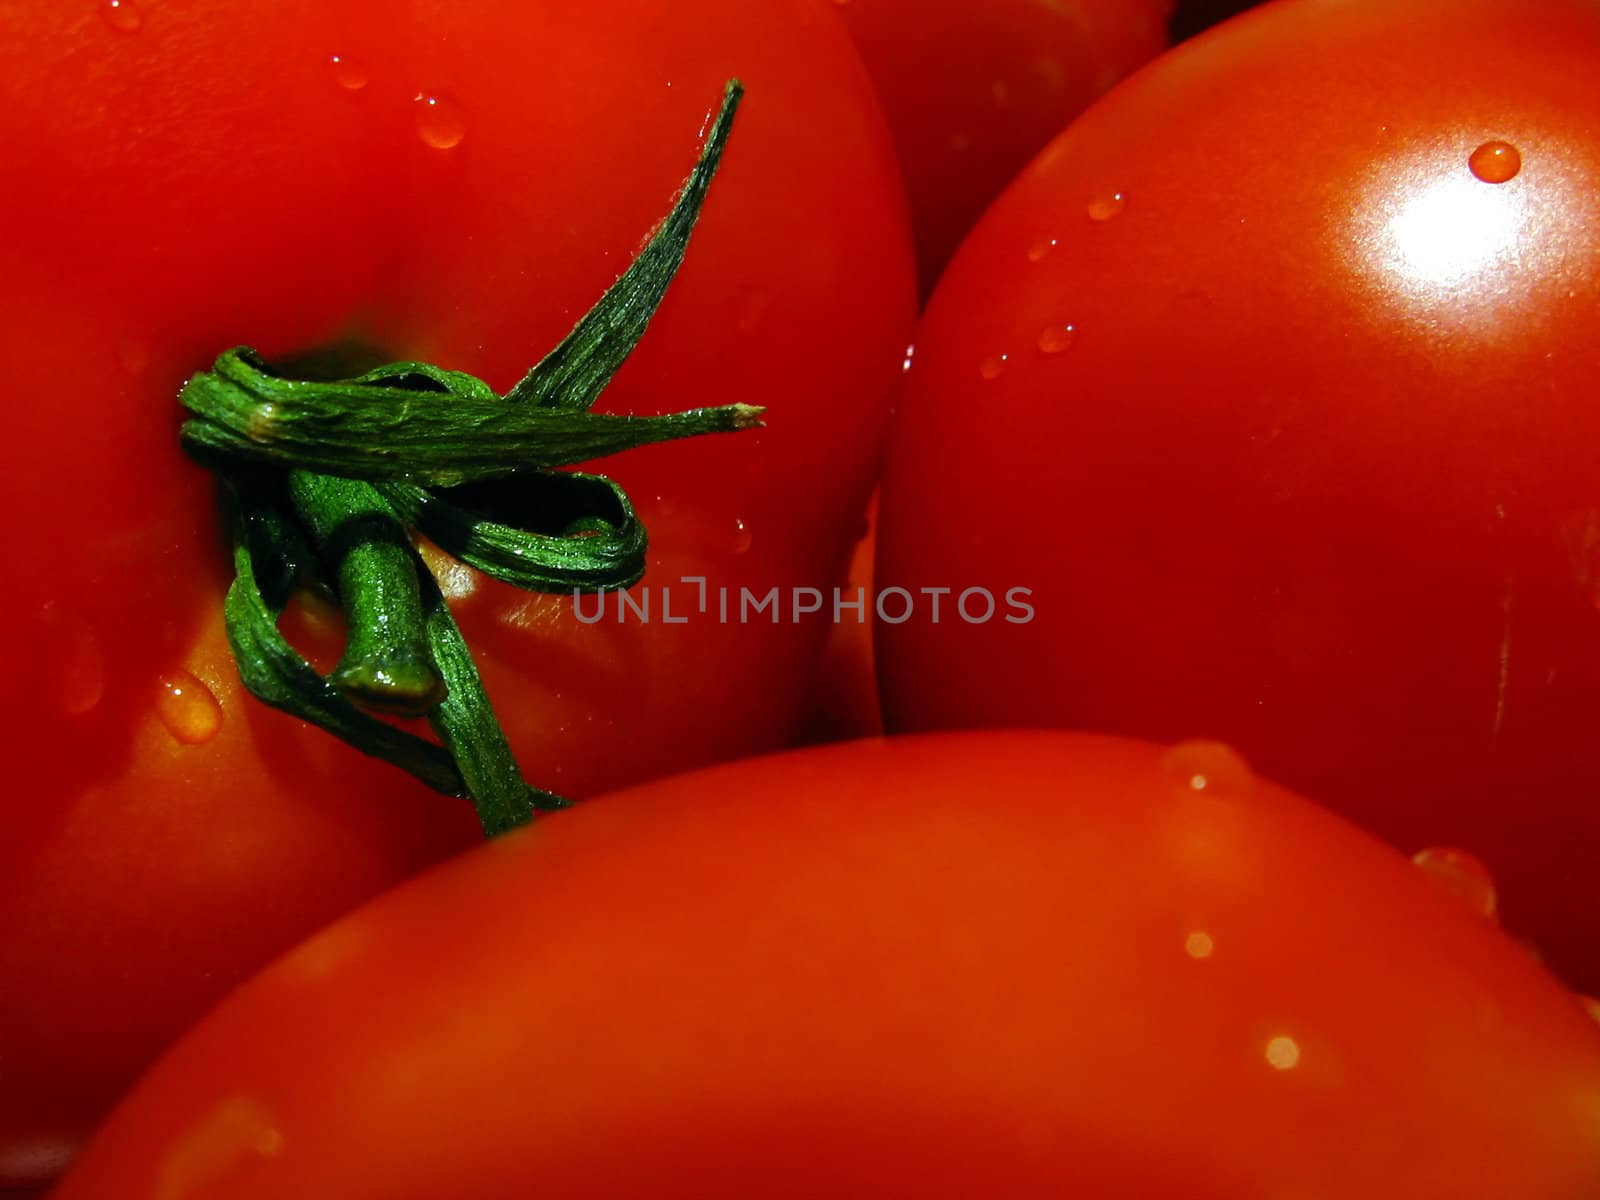 Tomatoes by tomatto